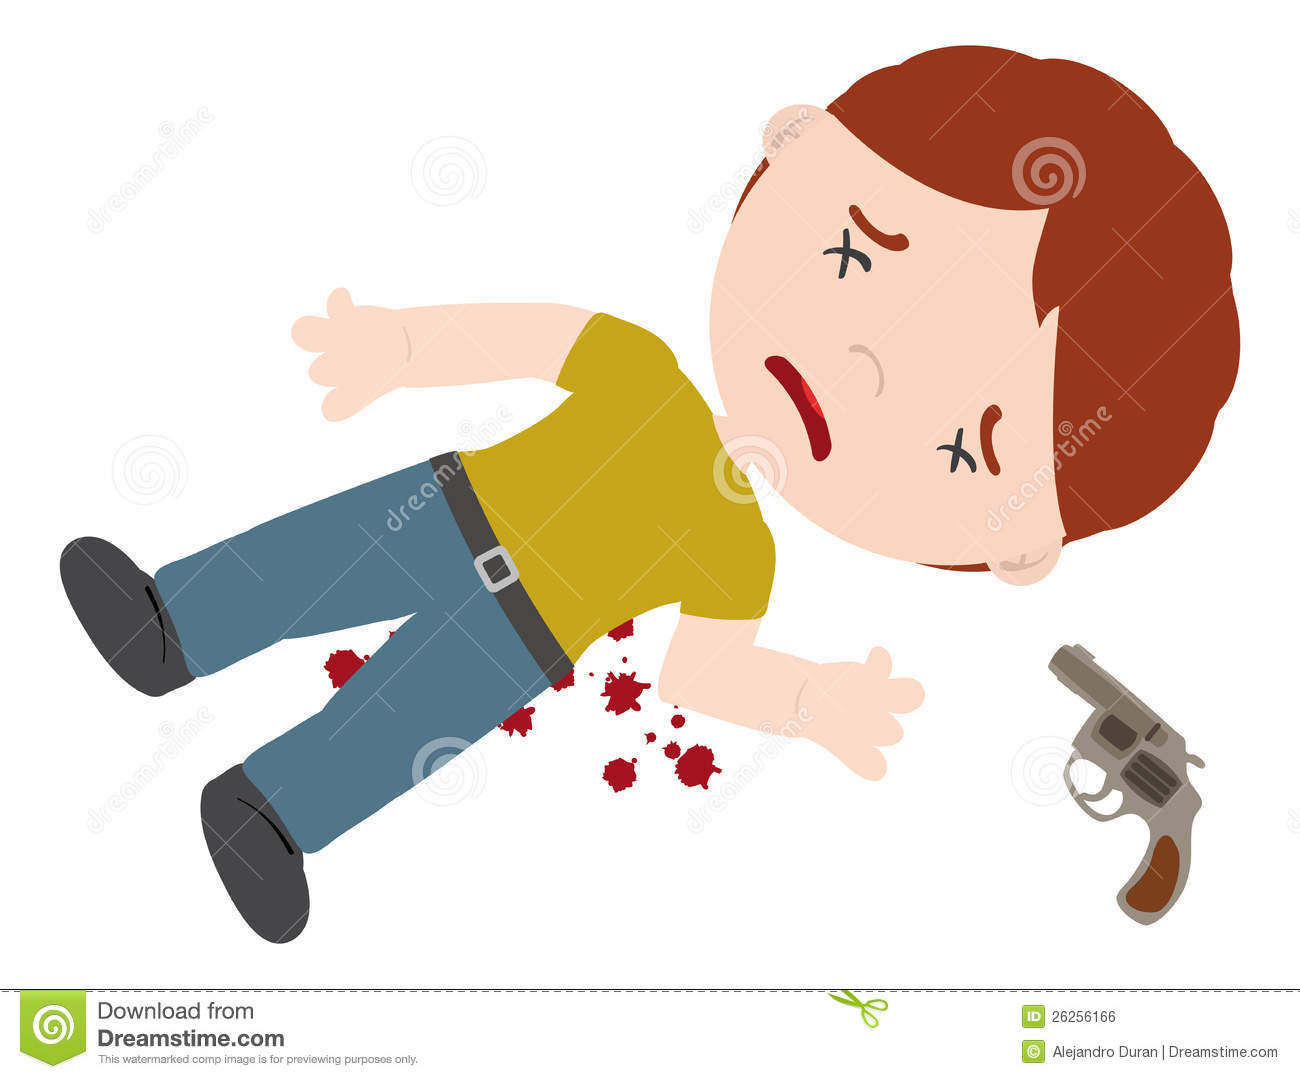 Homicide Royalty Free Stock Image   Image  26256166